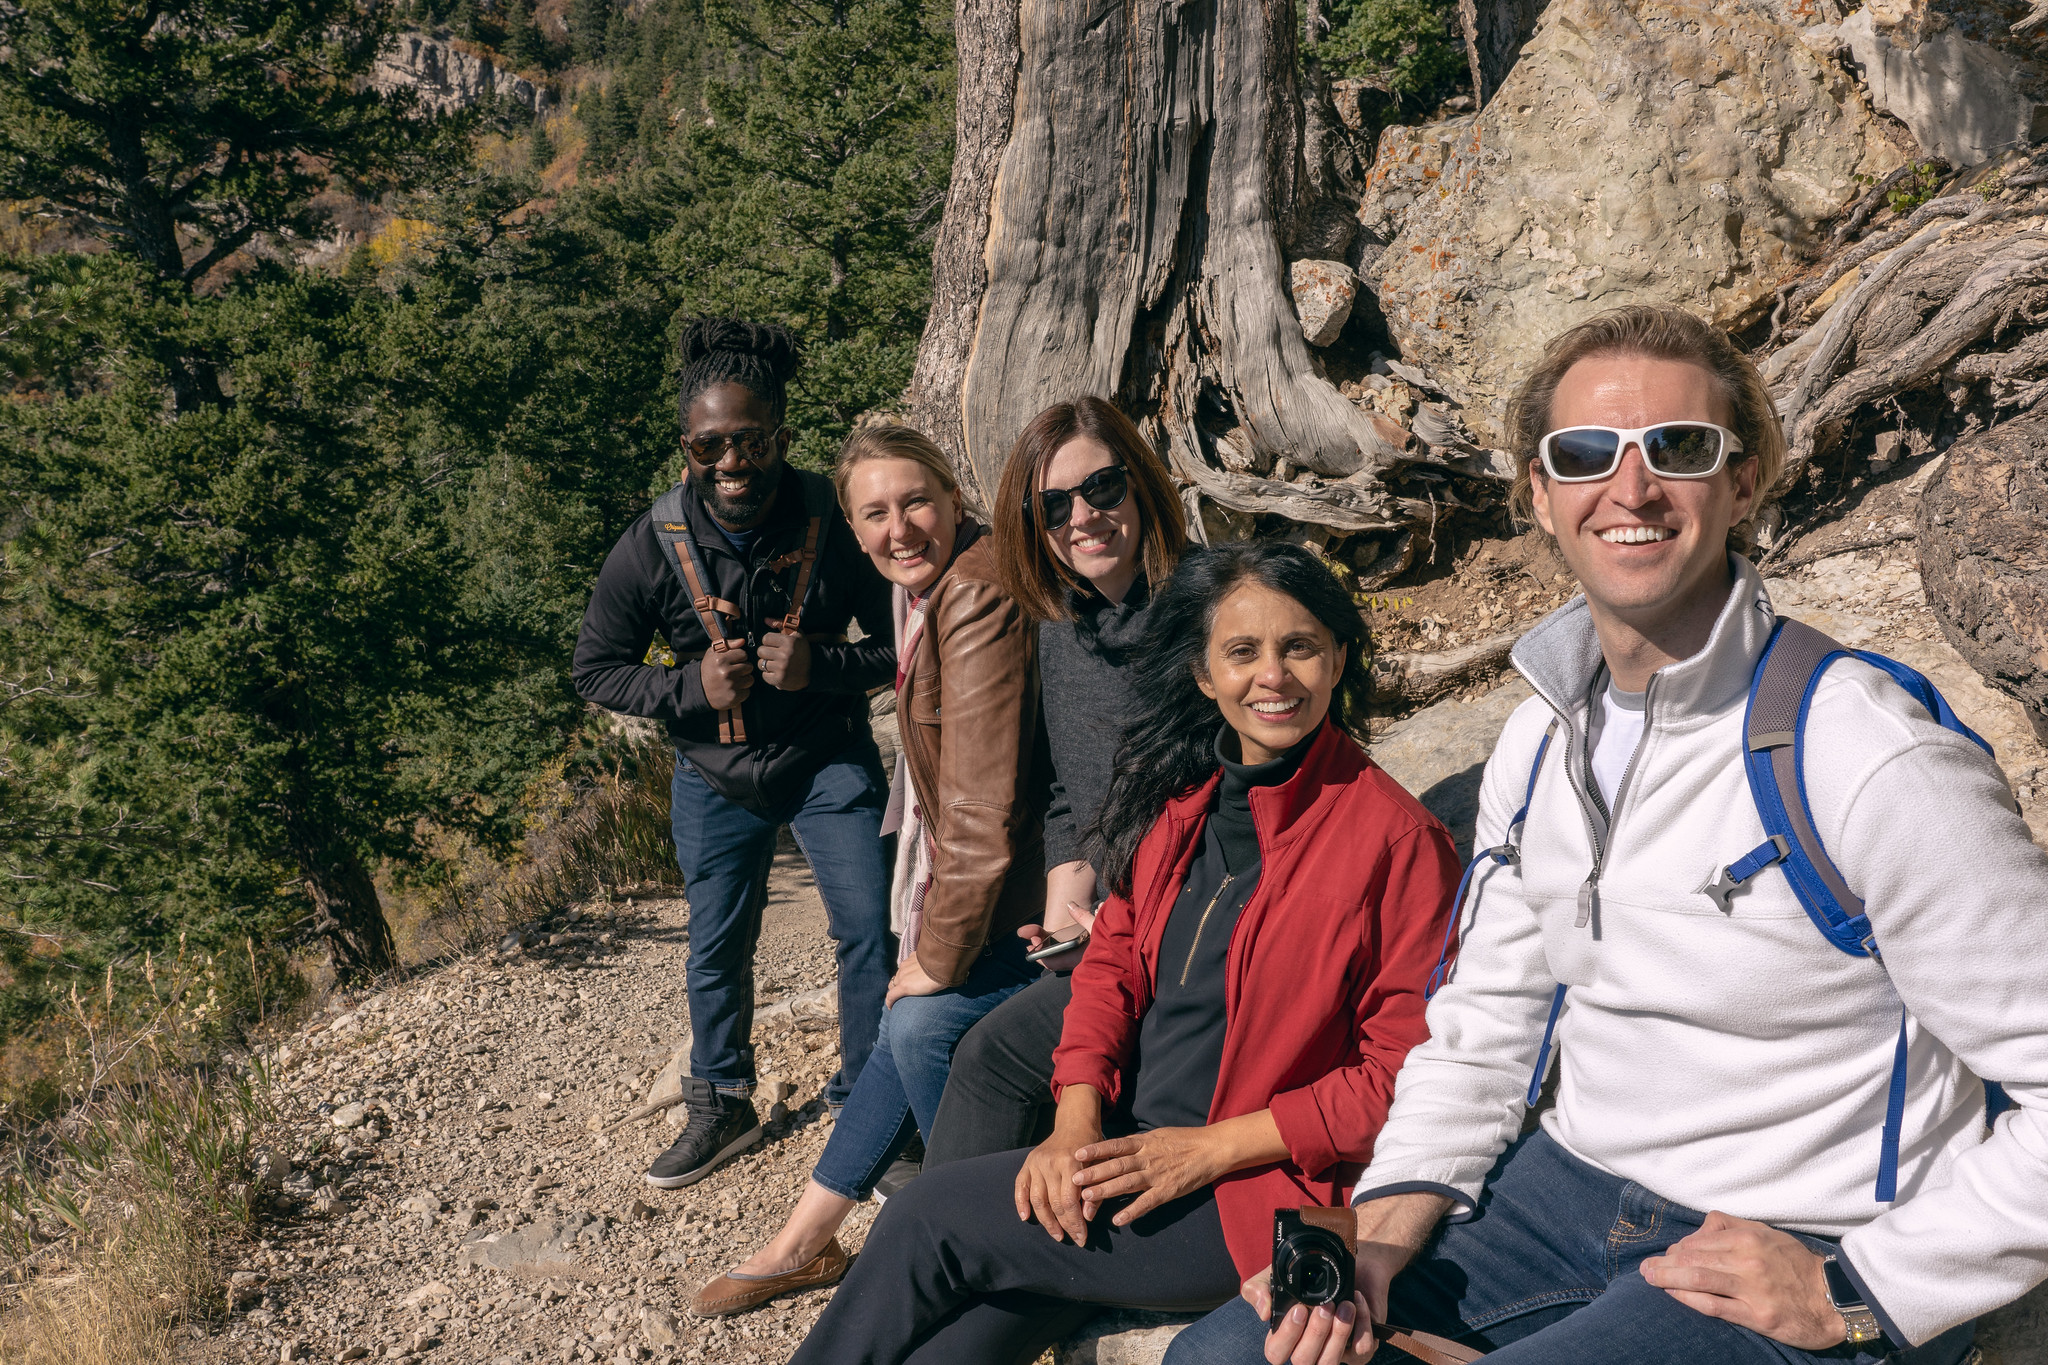 SAC convention attendees take a break after hiking a trail on Sandia Peak in New Mexico. Photo by Pieter Damsteegt